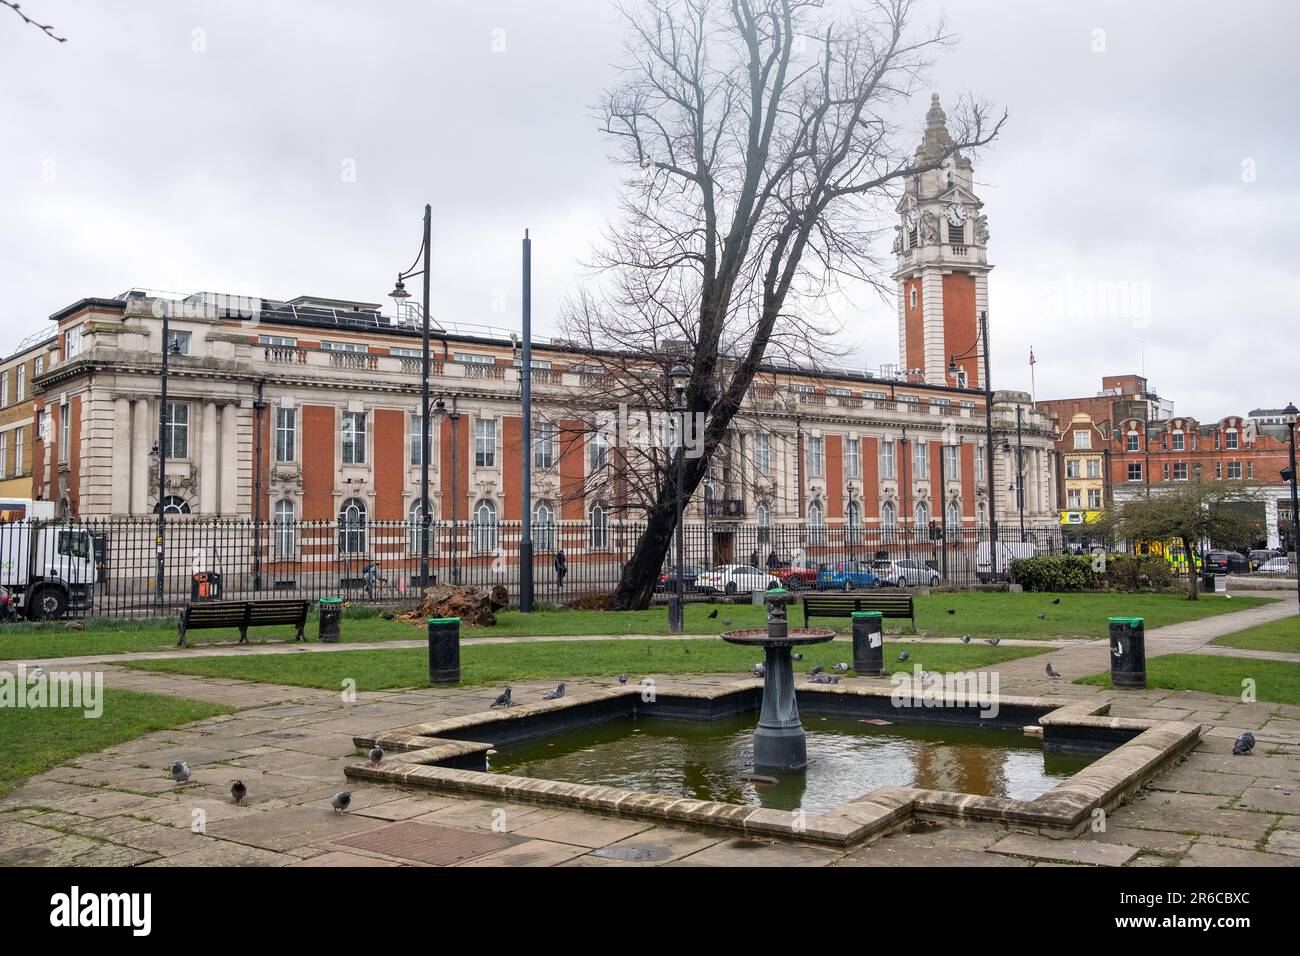 LONDON, MARCH 2023: Lambeth London Borough Council Town Hall building in Brixton, south west London Stock Photo